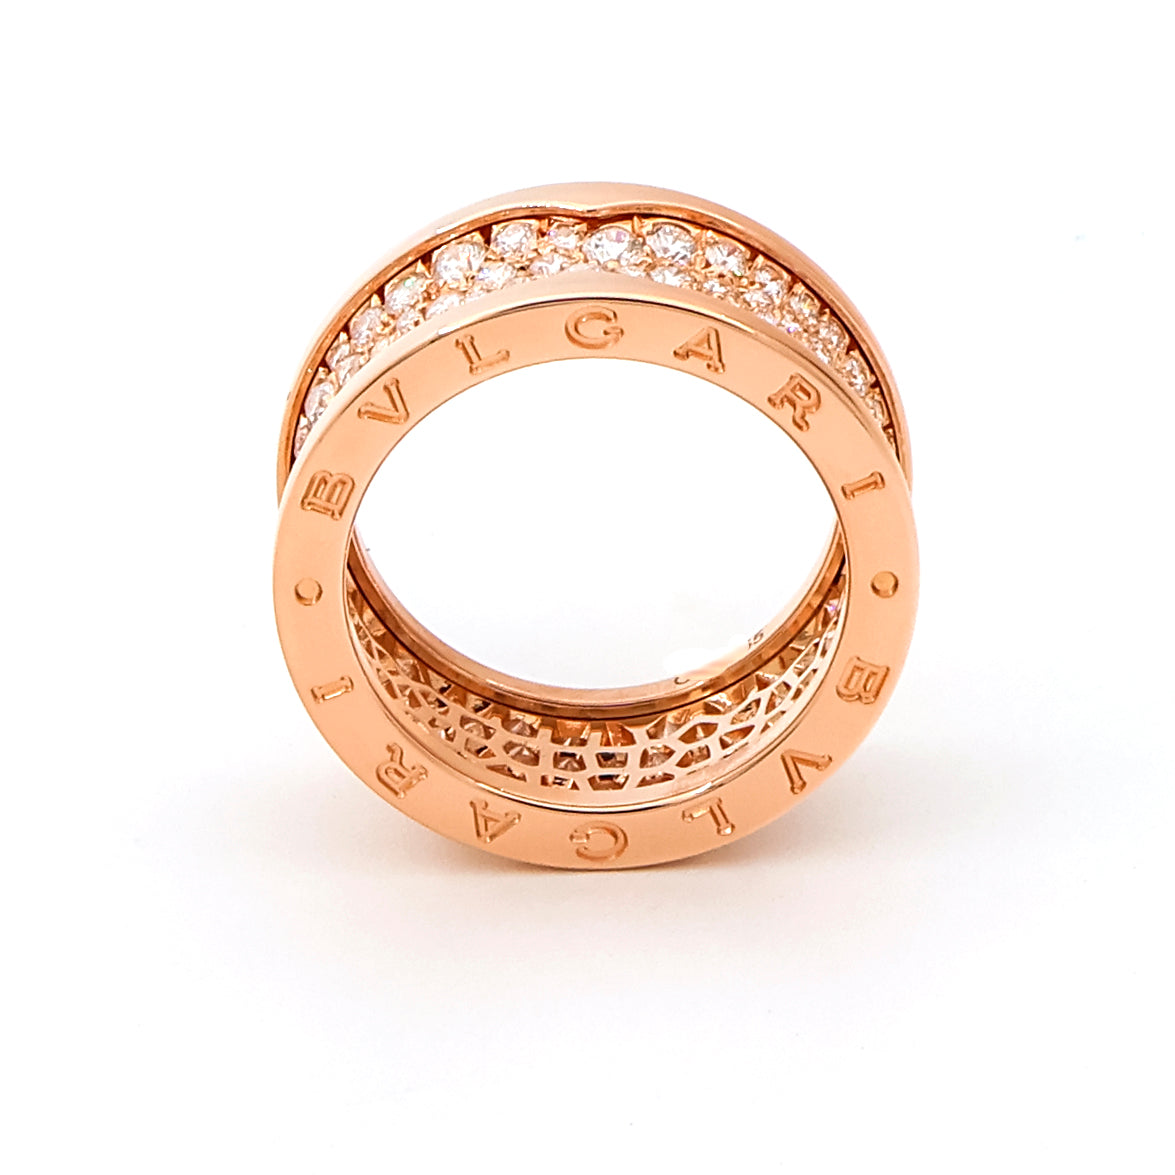 B.zero1 18k Rose Gold Ring with 2.52cttw Pave Diamonds - Size 58